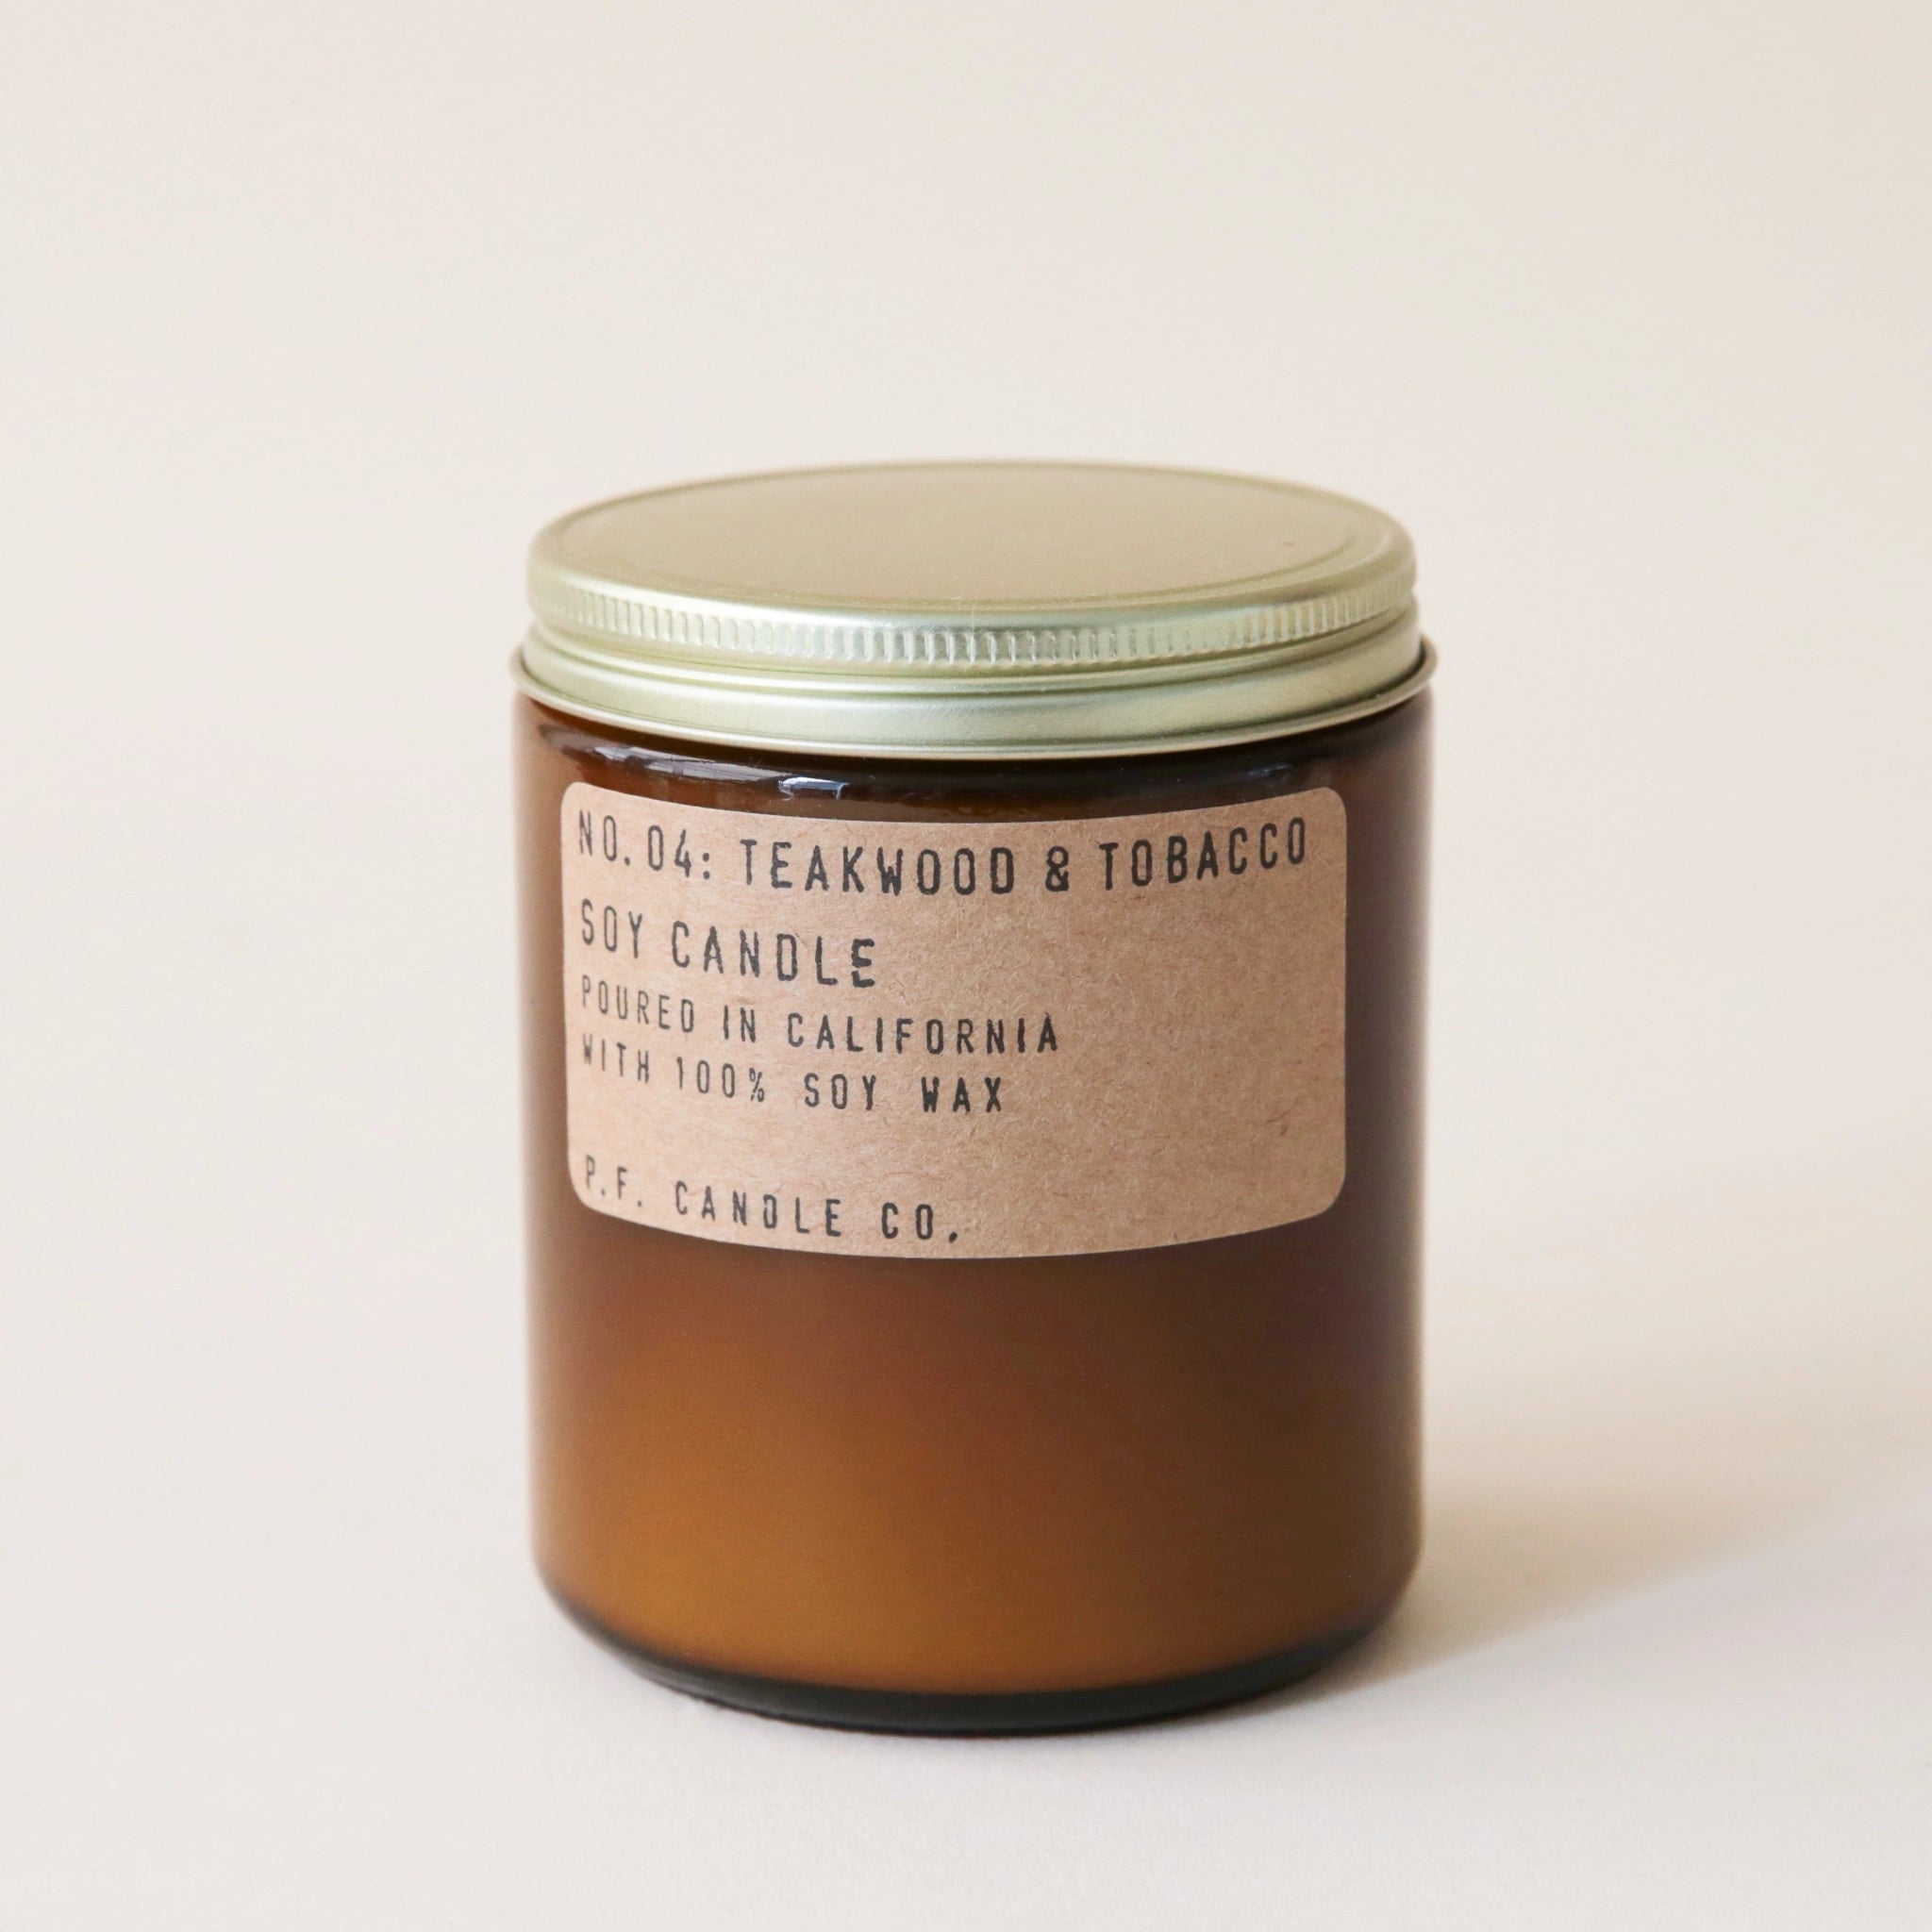 Against a white background is a dark amber, round jar. The jar has a gold lid. On the front of the jar is a brown, rounded, rectangular sticker with black text. The text reads ‘no.04 teakwood & tobacco. Soy candle. Handmade in California with 100% soy way. P.F. candle co.’